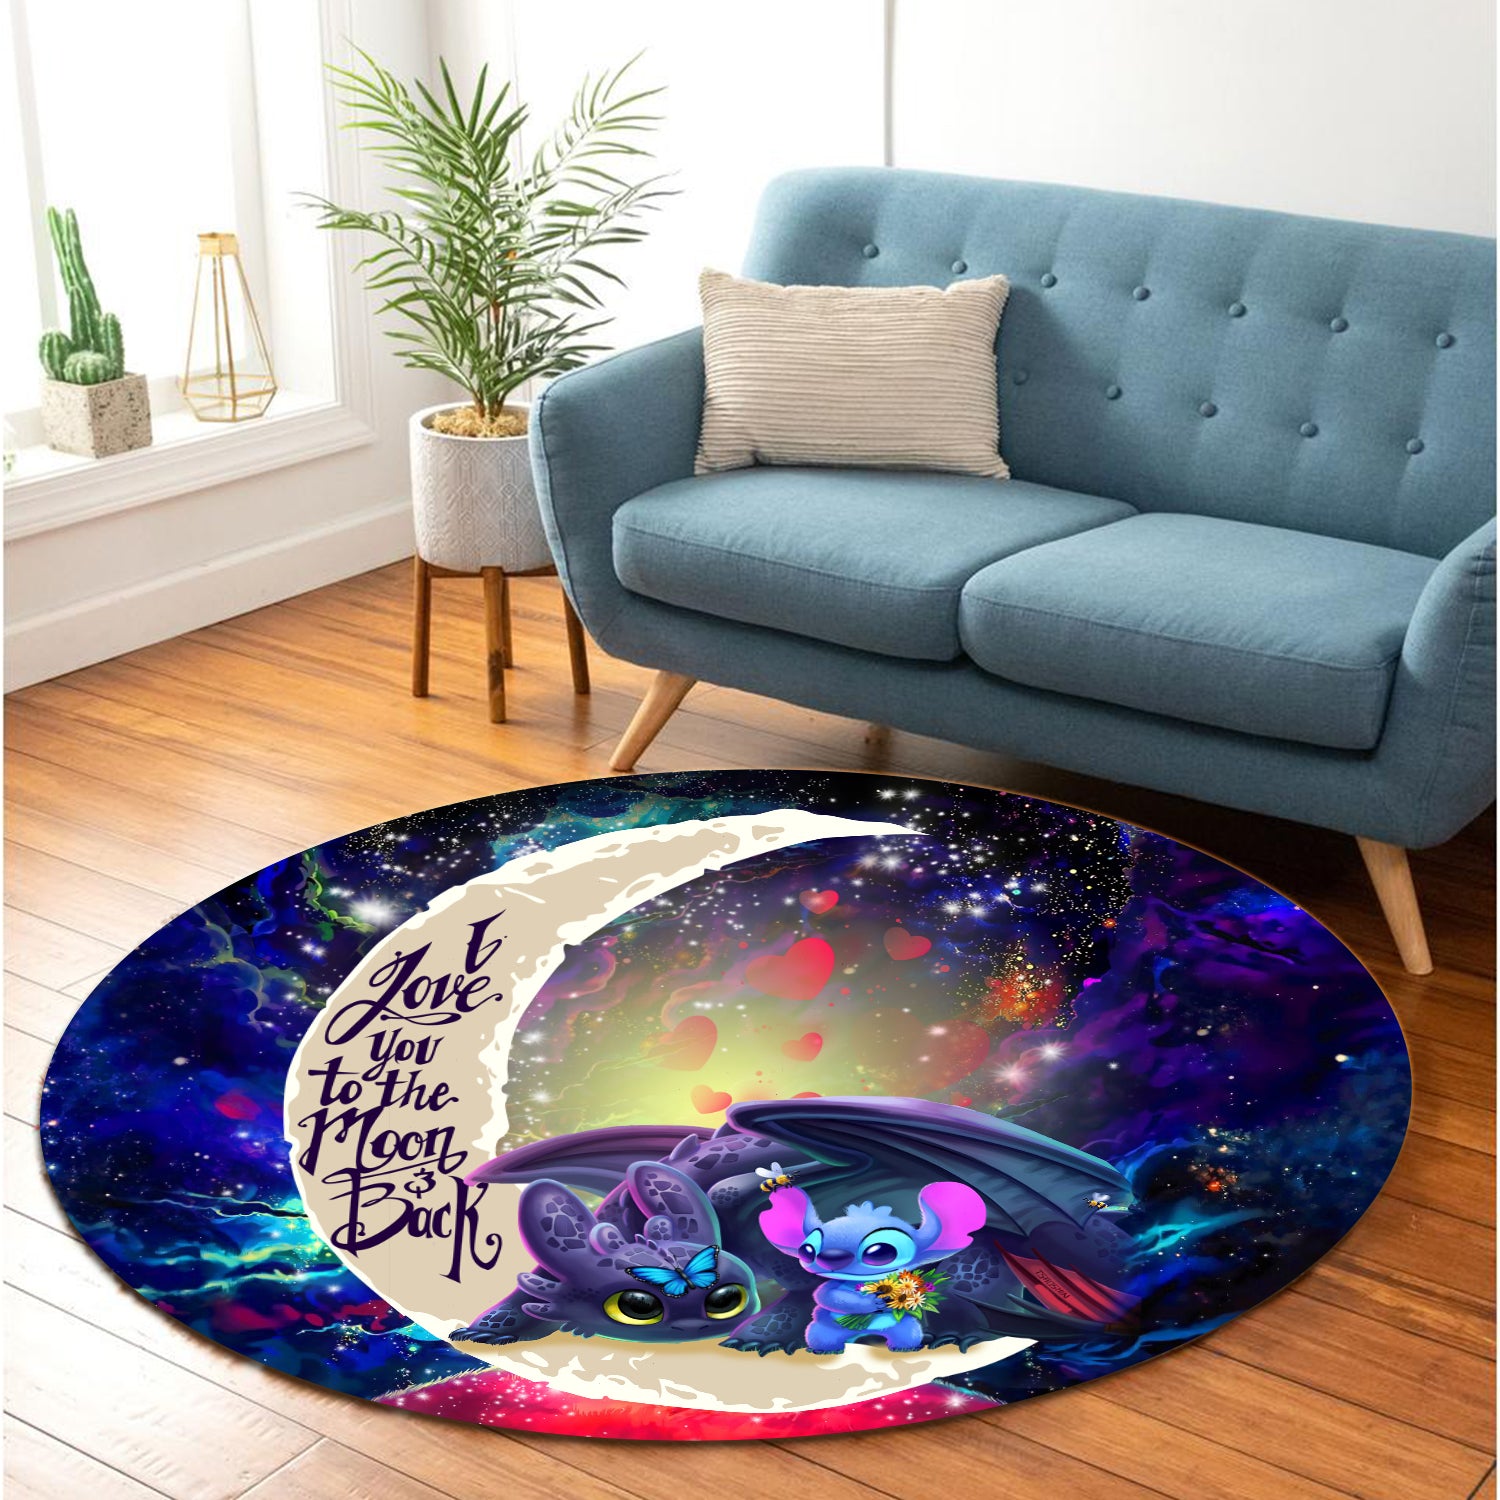 Stitch And Toothless Love You To The Moon Galaxy Round Carpet Rug Bedroom Livingroom Home Decor Nearkii